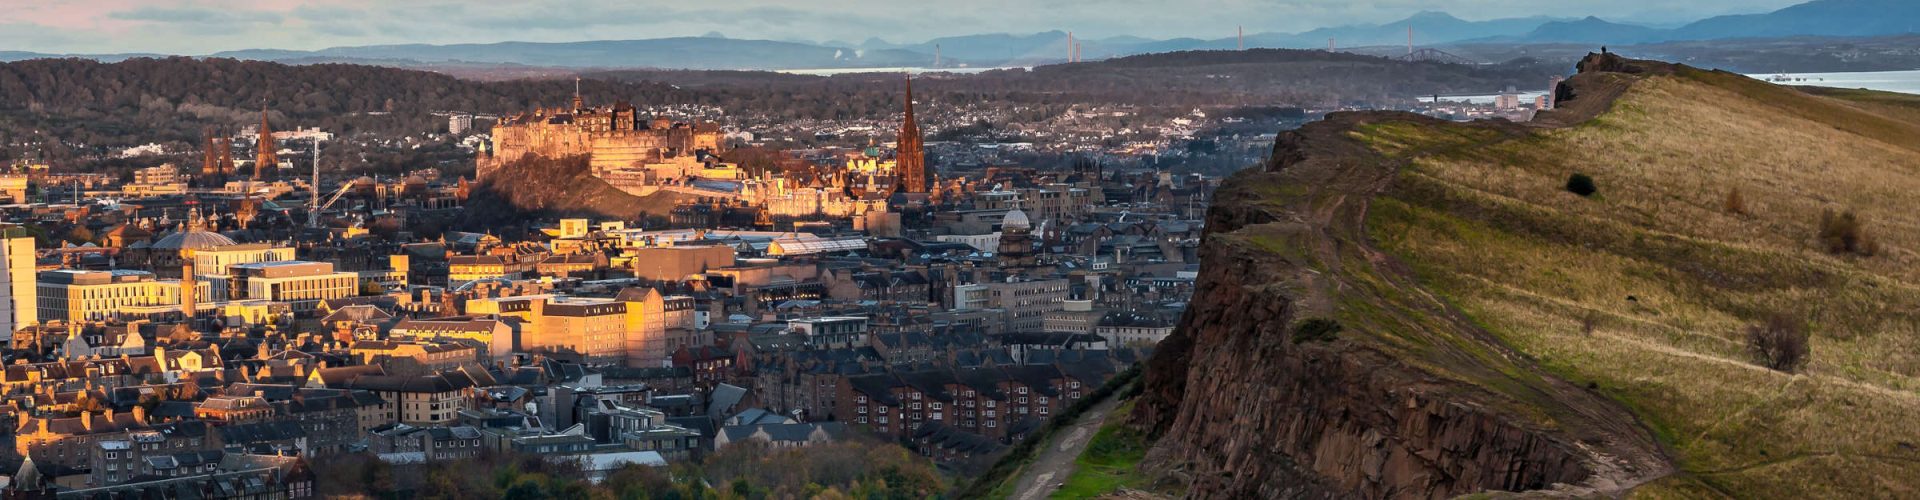 Sunset over the Salisbury Crags and Arthur's Seat in Edinburgh